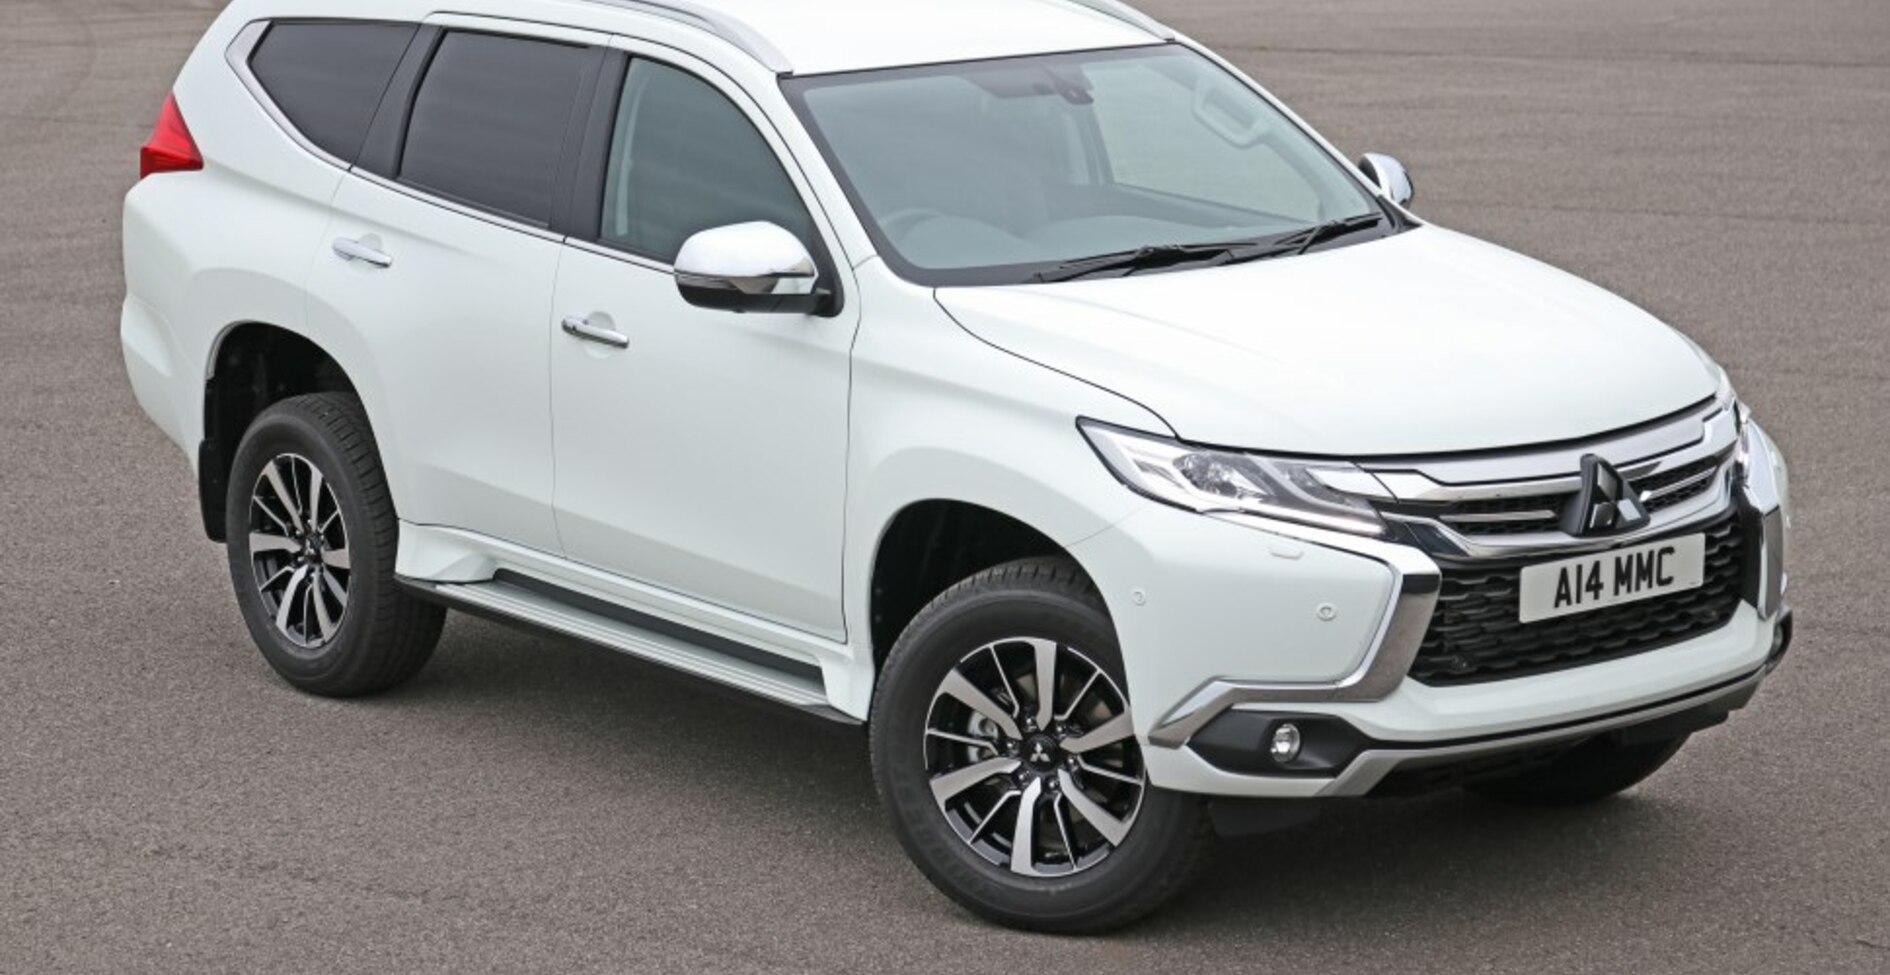 Used Mitsubishi 2018 PAJERO MANUAL 32 DSL SWB 2DR for sale in Kerry